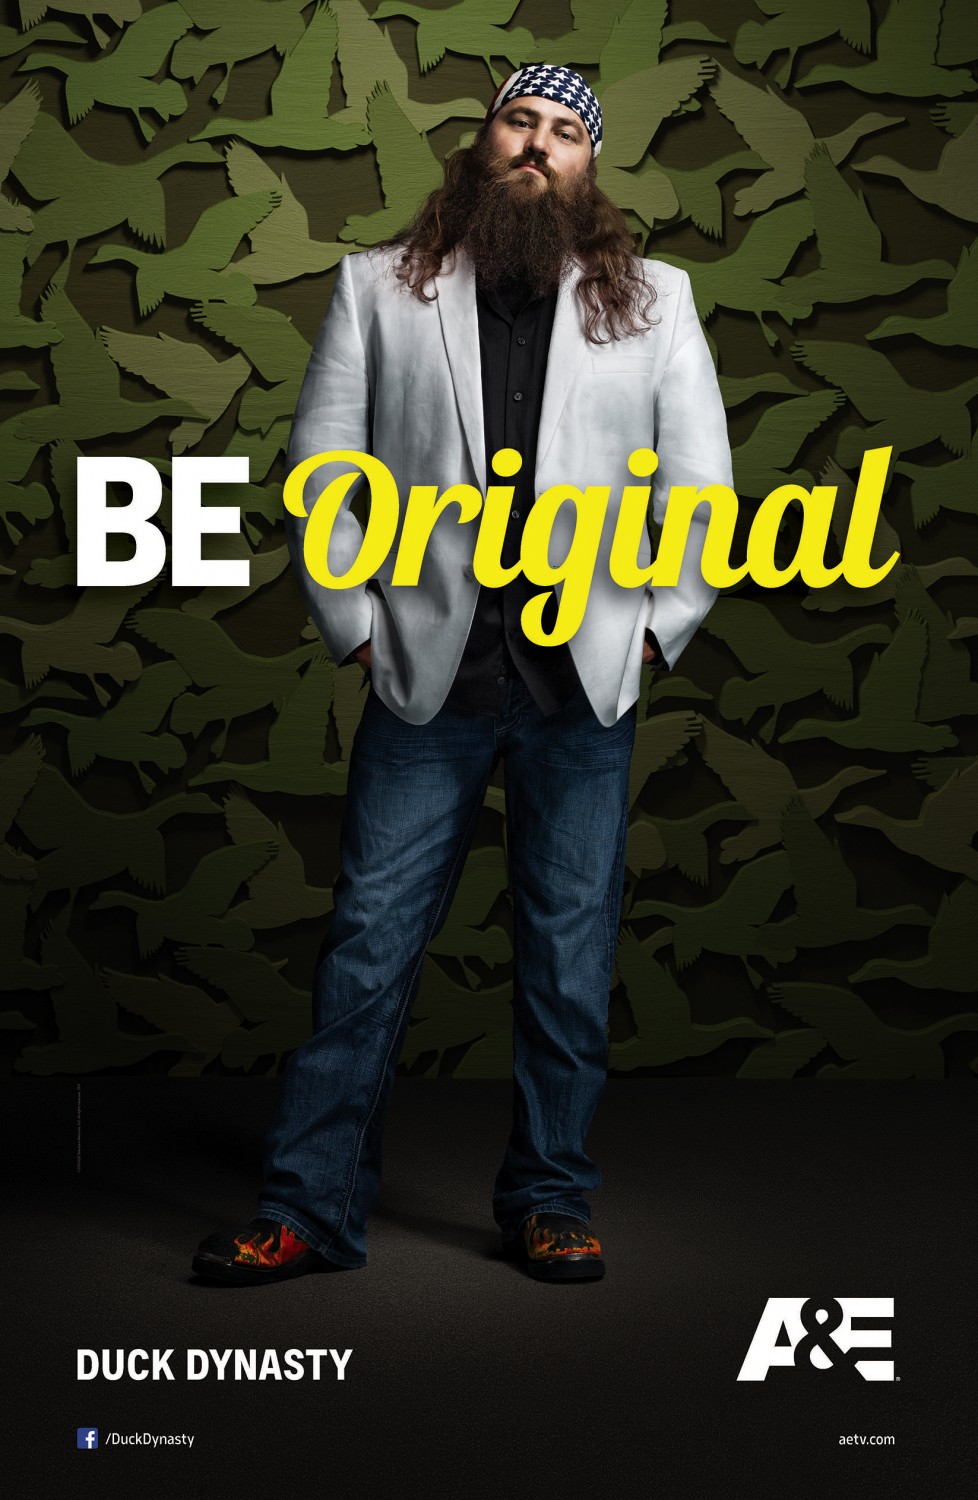 Extra Large TV Poster Image for Duck Dynasty (#7 of 7)